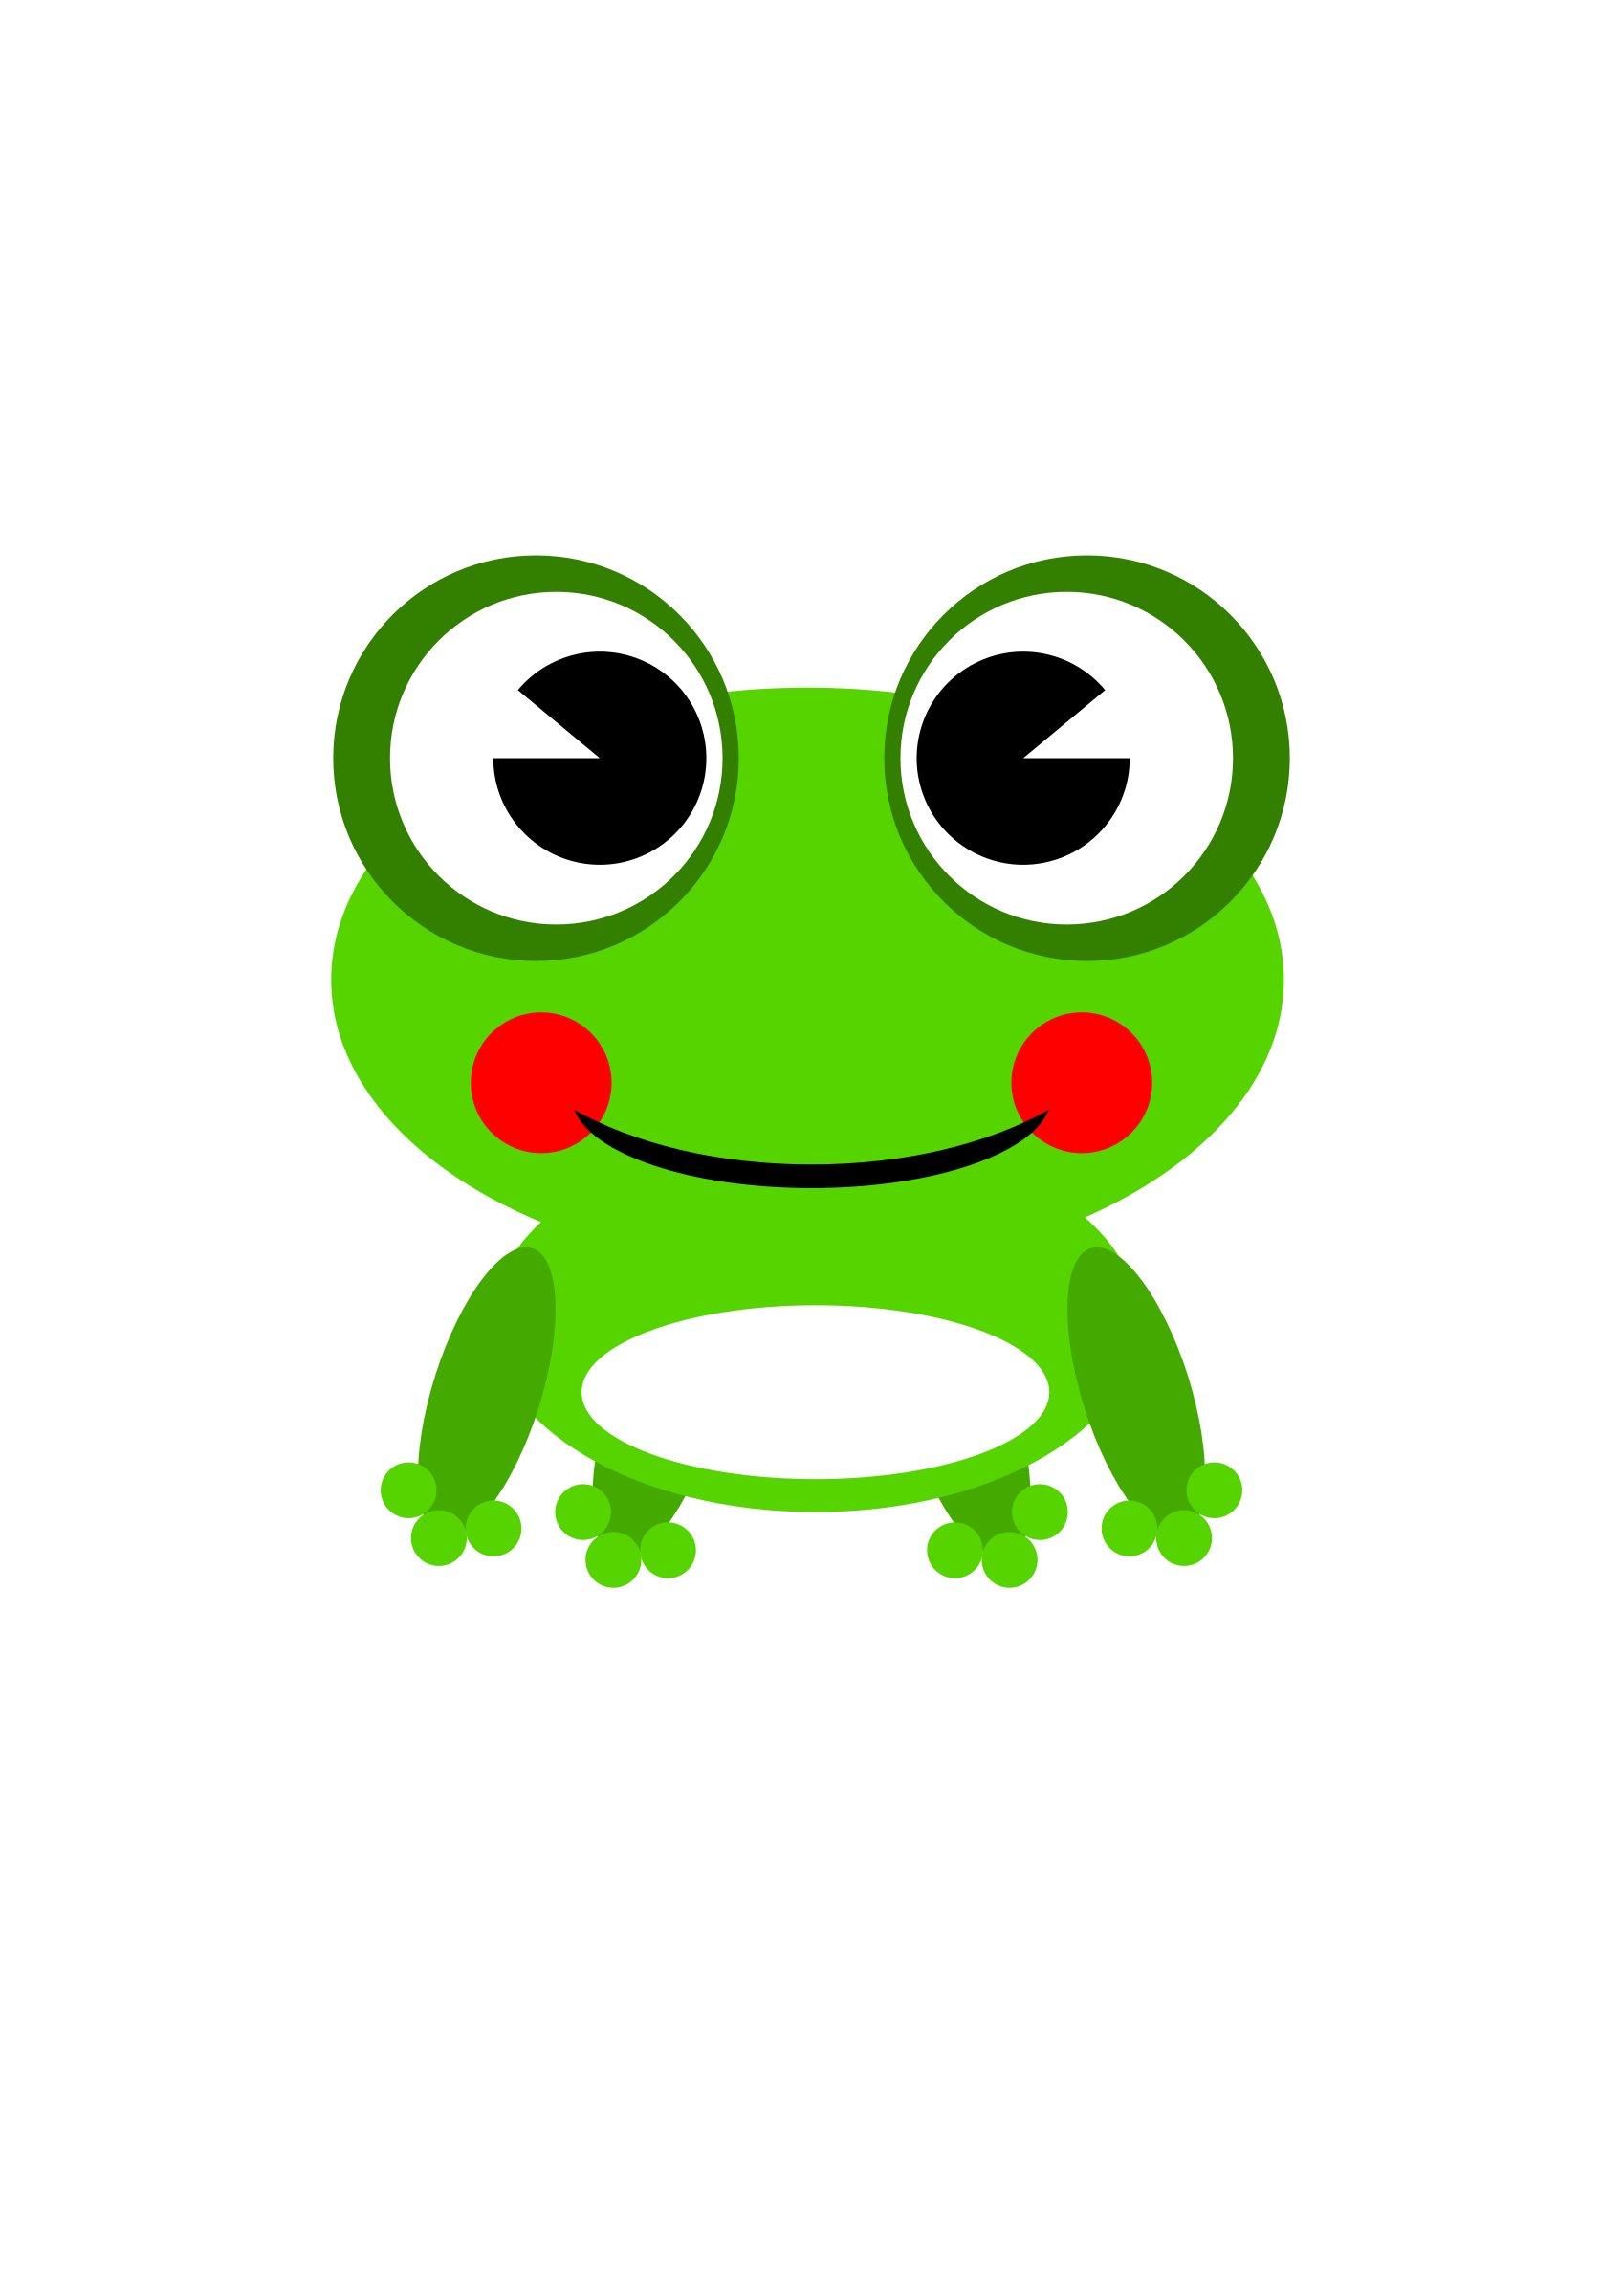 Clipart - frog-by Ramy